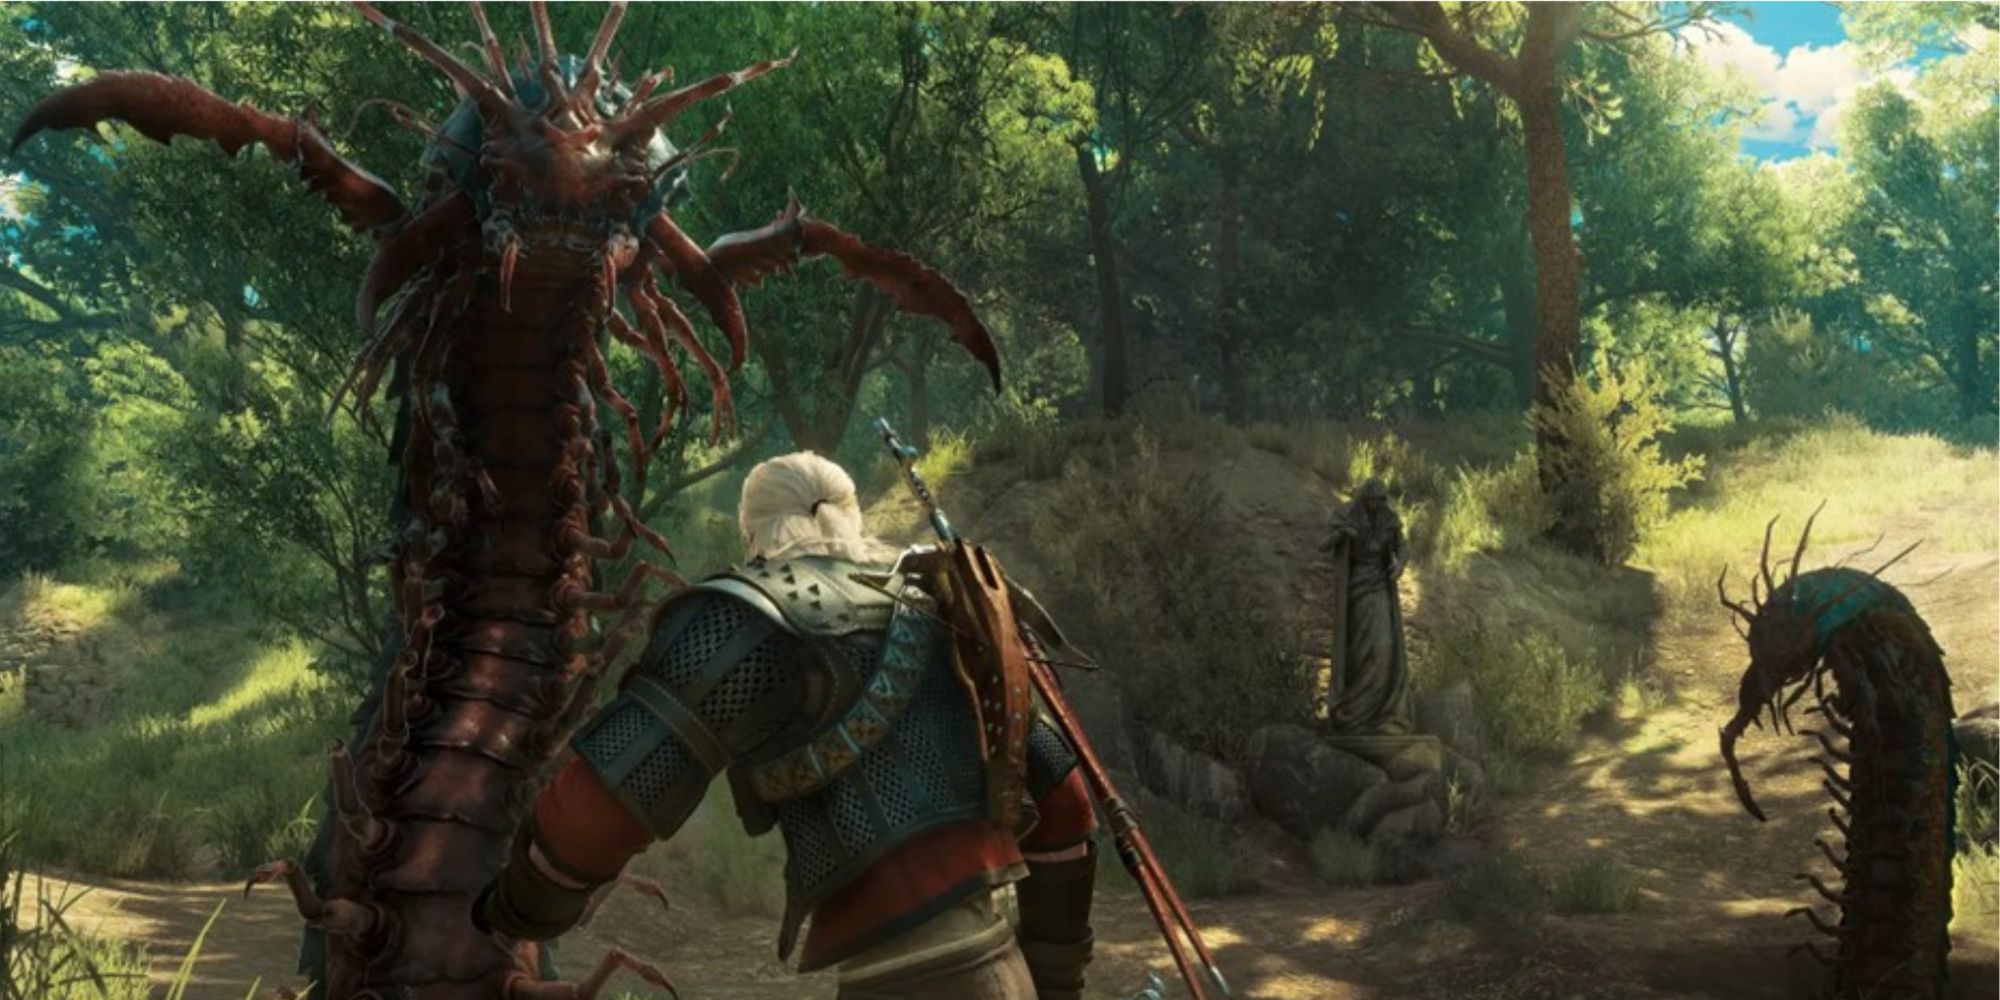 Geralt facing two giant centipedes in The Witcher 3